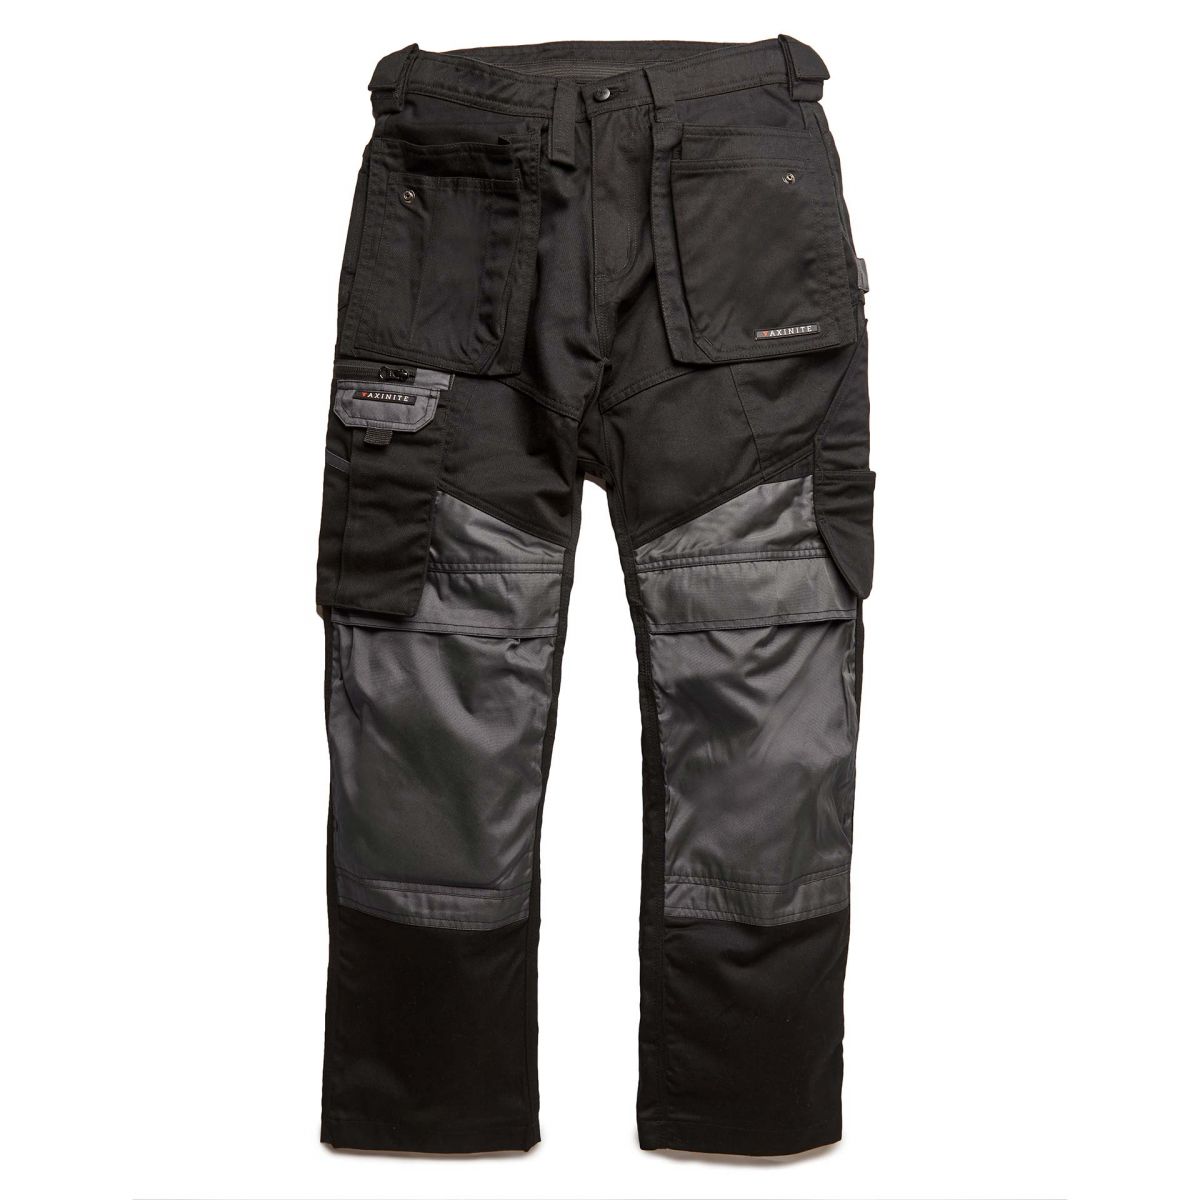 View Axinite AX39 Workwear Trousers Black 28L information